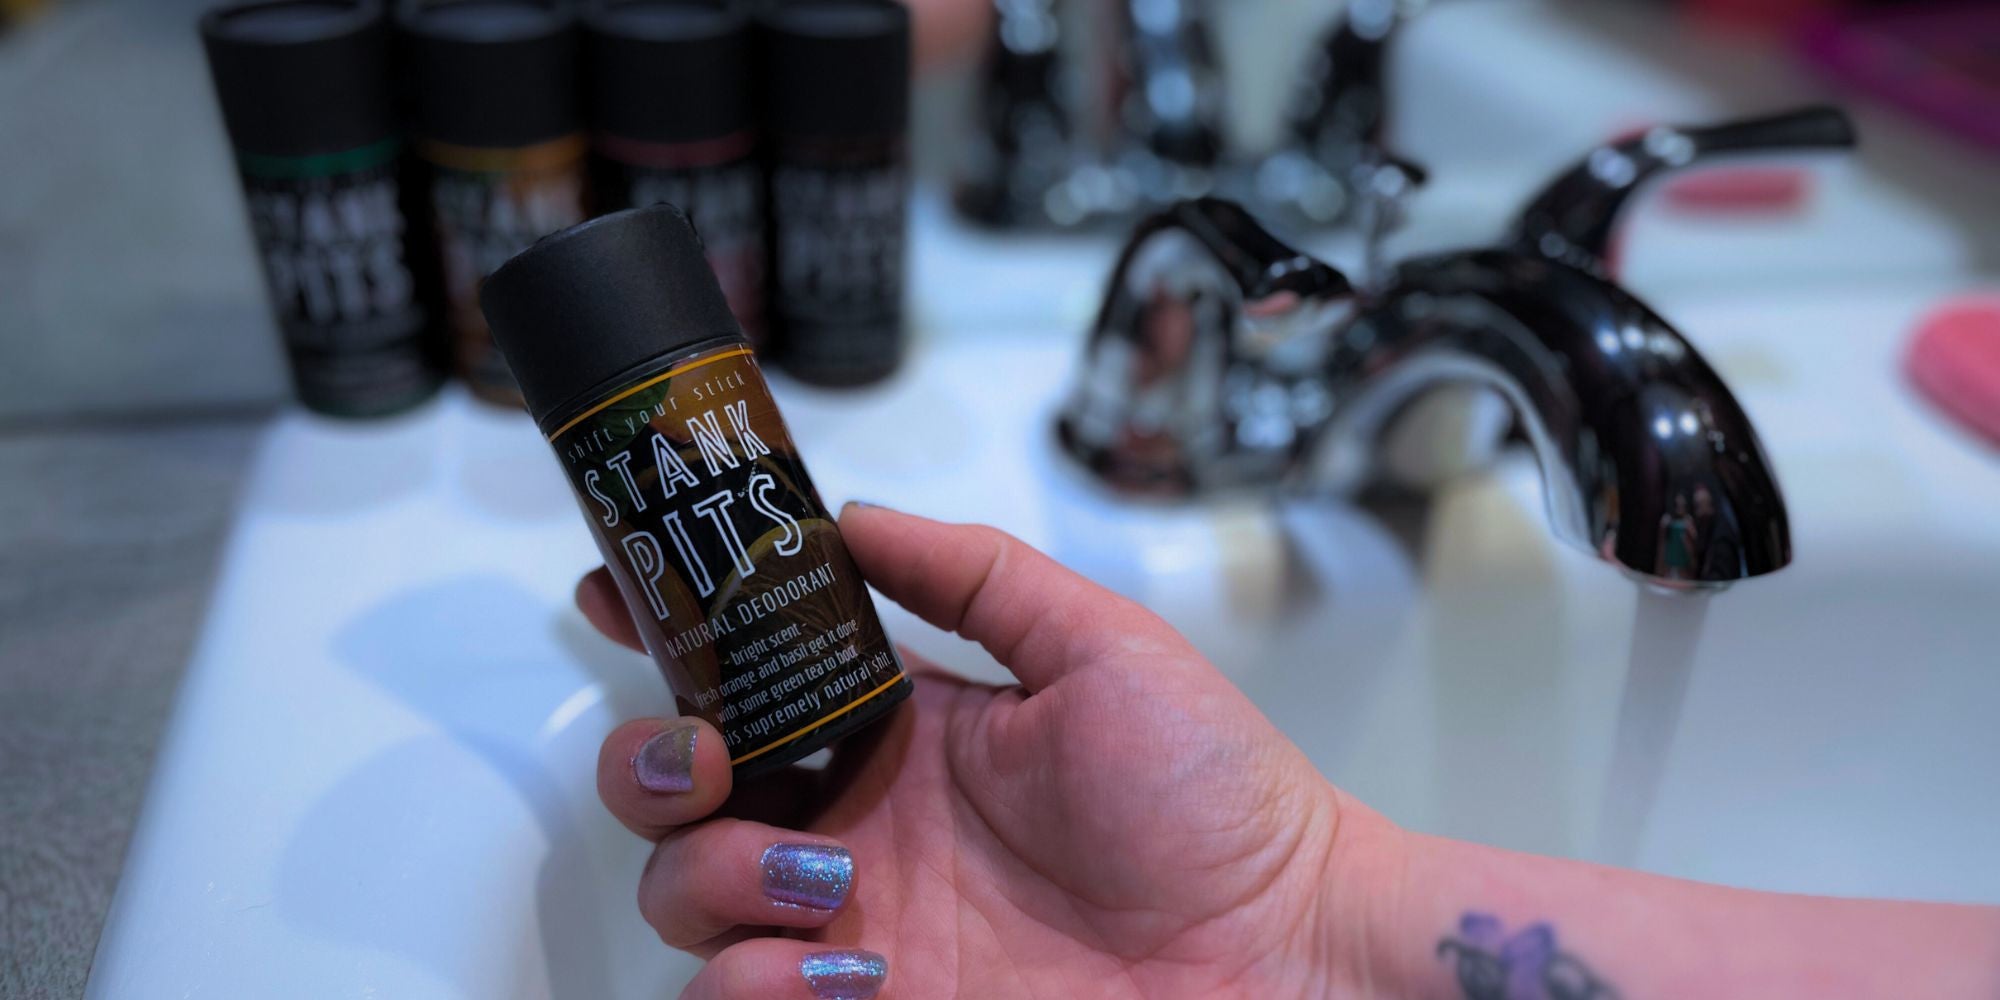 Person with tattoos and painted nails holding plastic-free natural deodorant called Stank Pits.